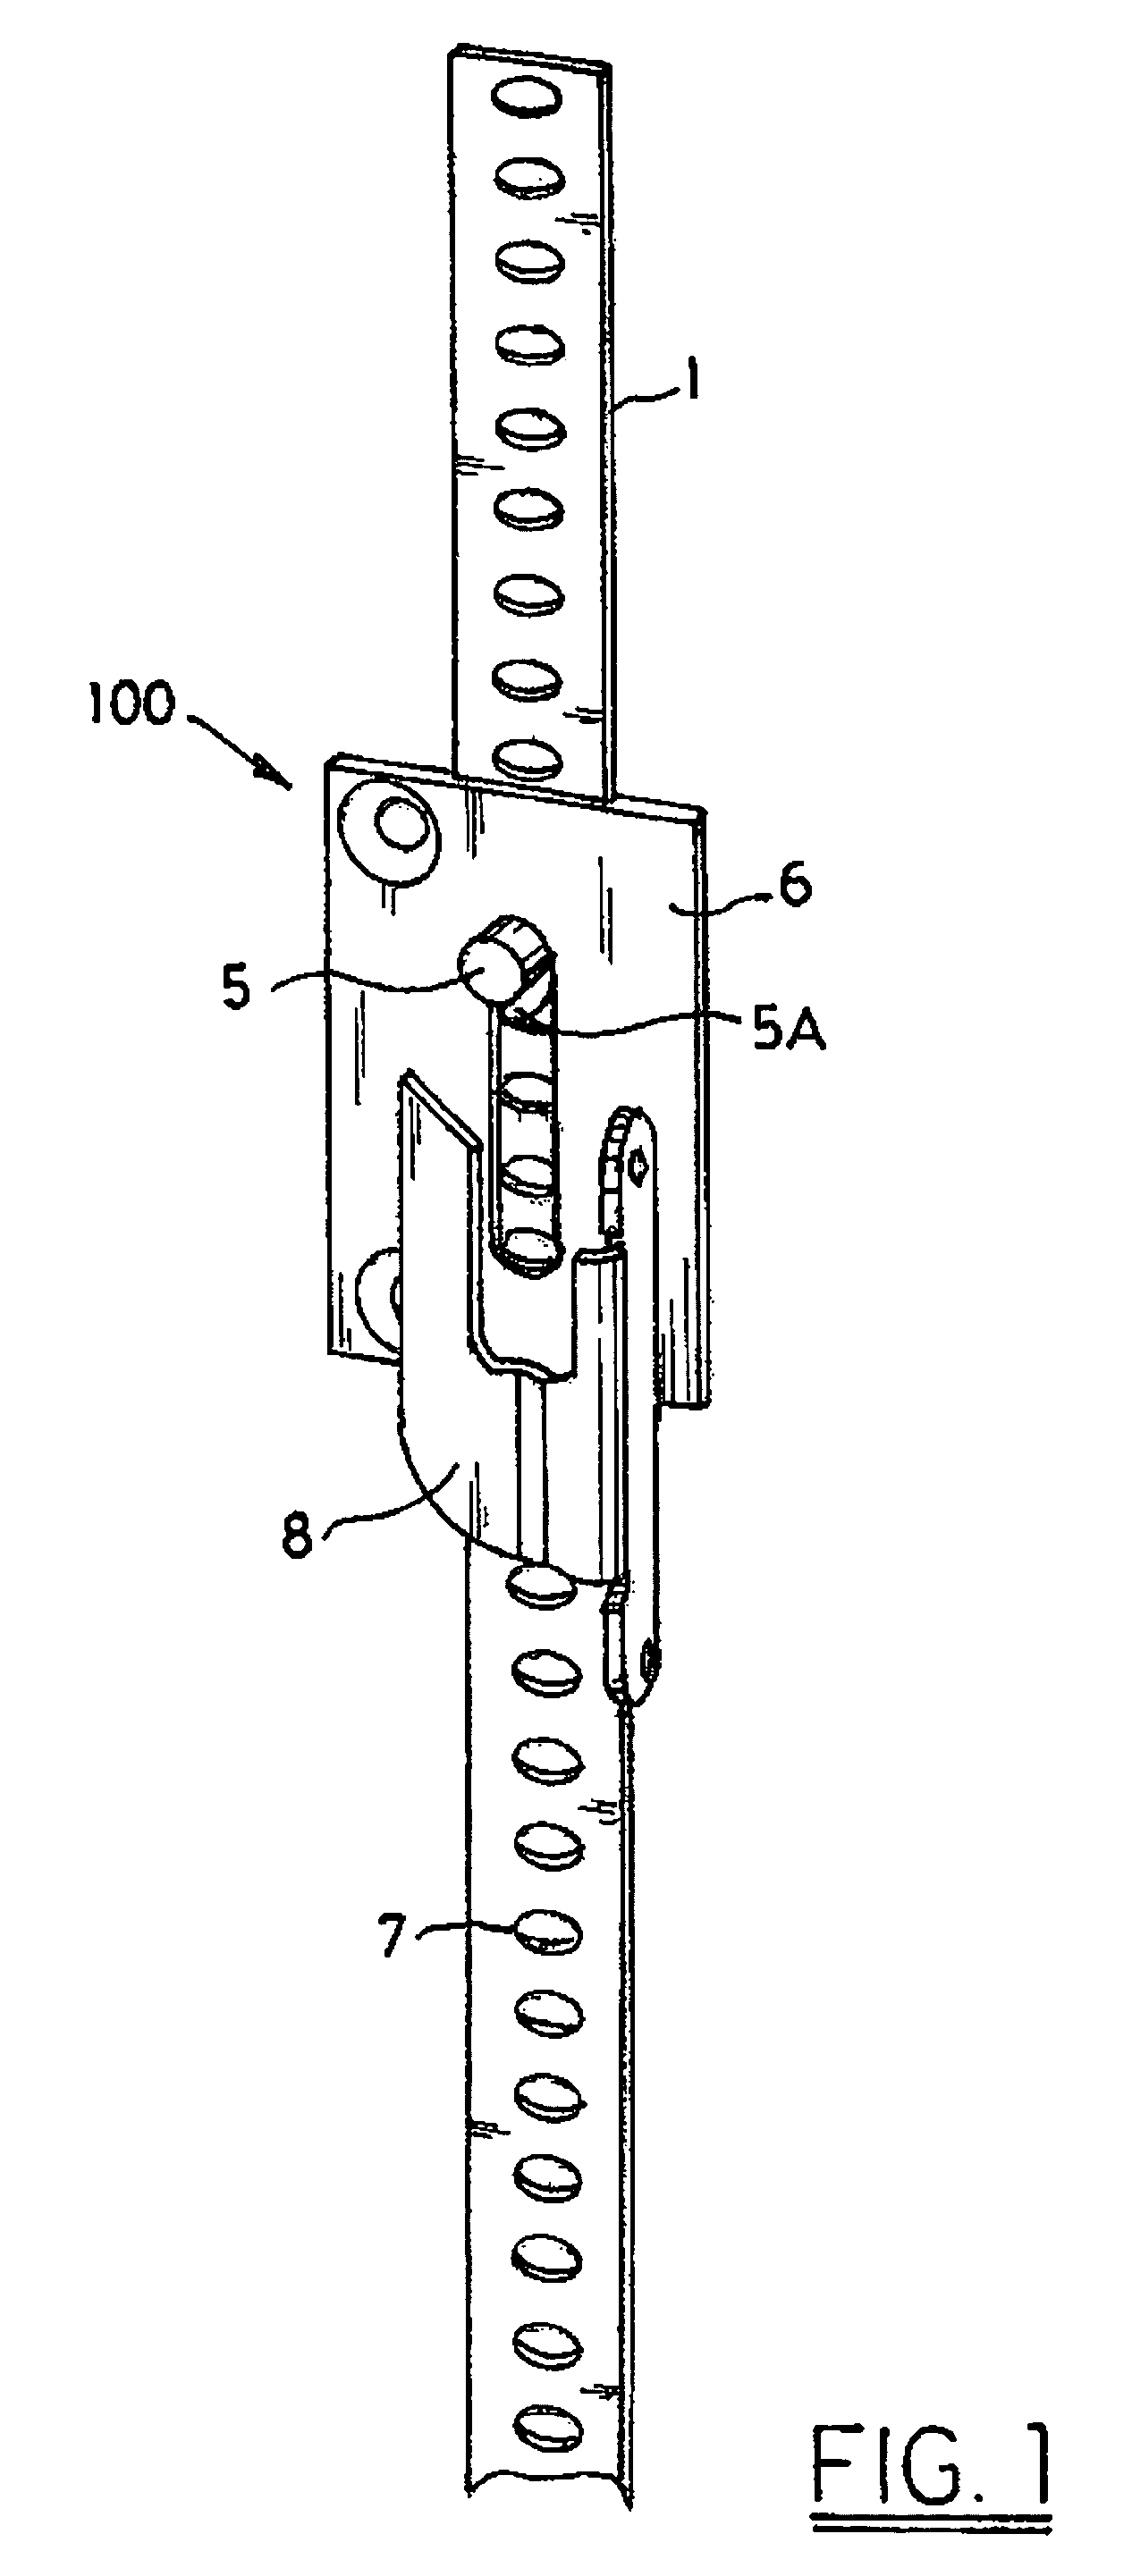 Actuator for use in fenestration systems